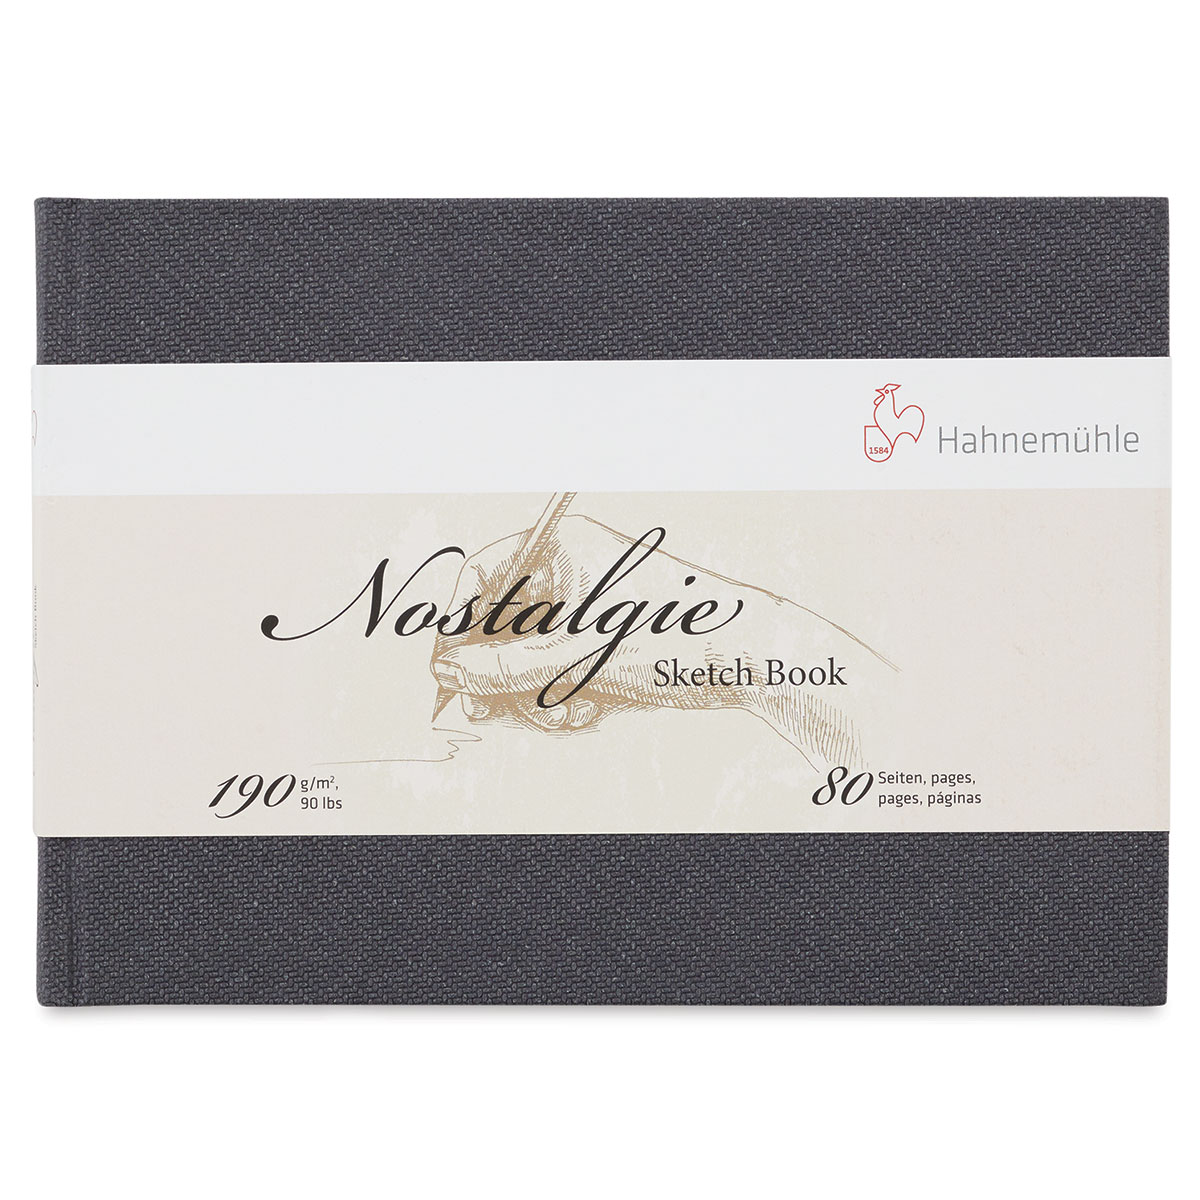 Hahnemuhle Nostalgie Sketch Book Portrait A6 (5.8X4.1 inches) 190gsm 40  sheets/80 Pages